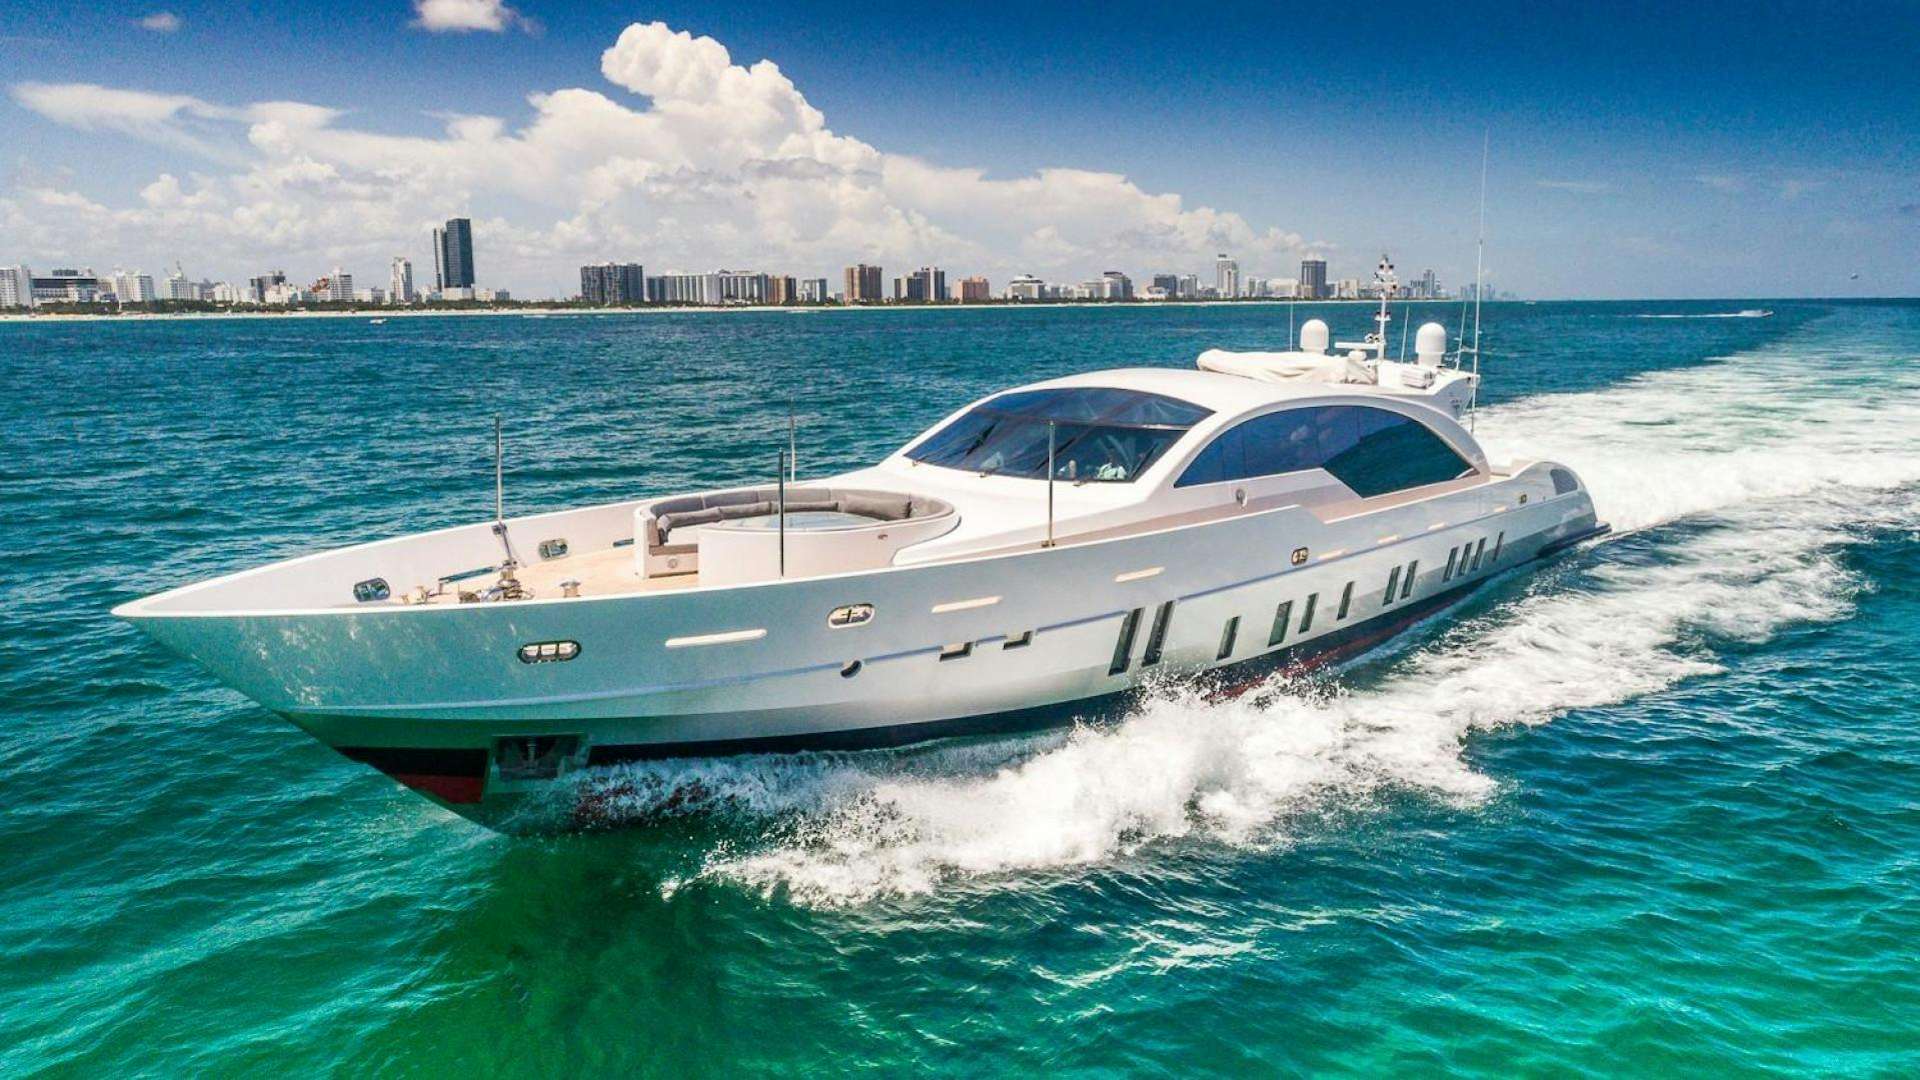 Double shot
Yacht for Sale